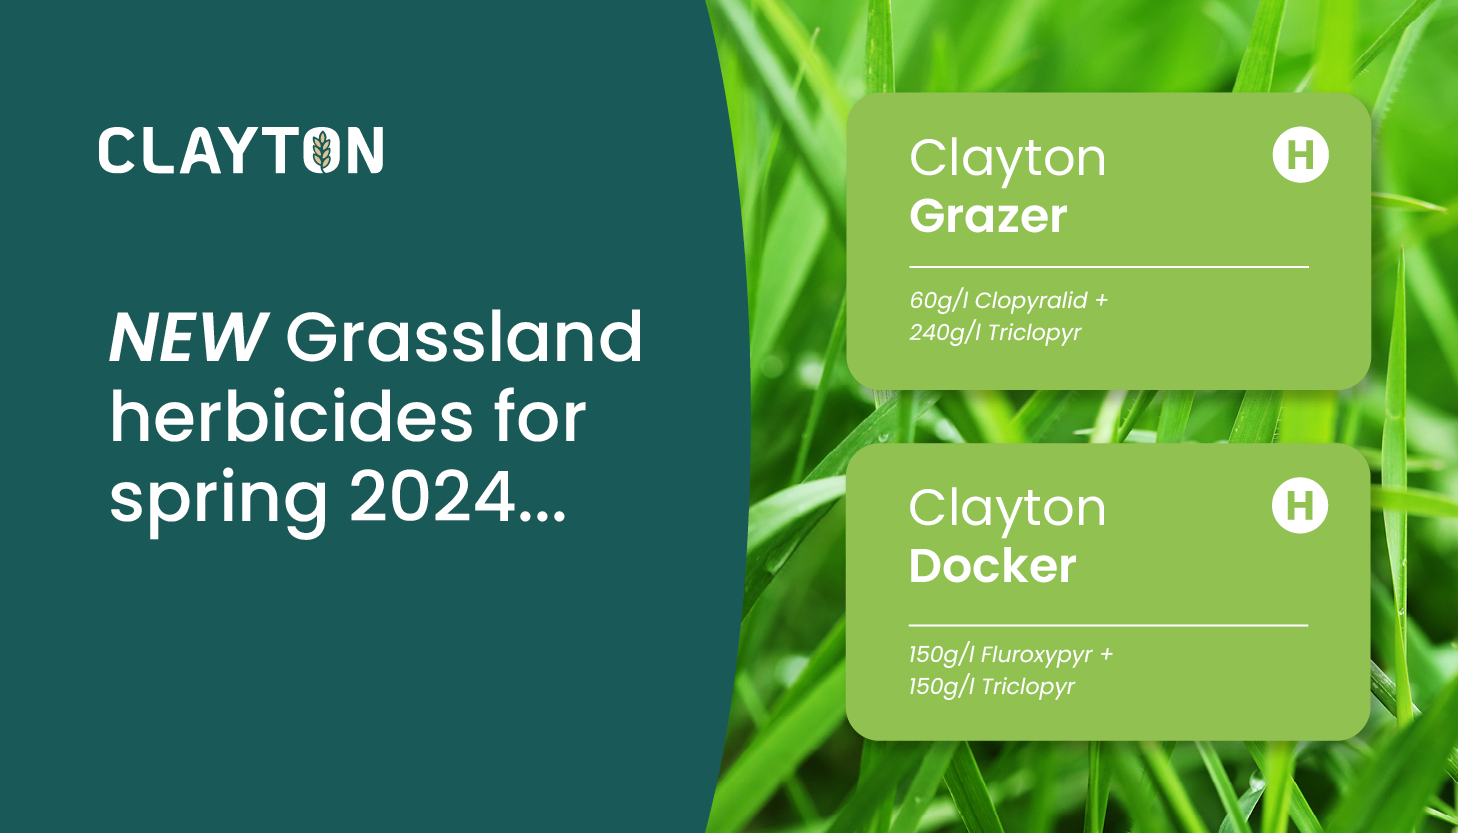 NEW Grassland herbicide launches for spring 2024… Clayton Plant